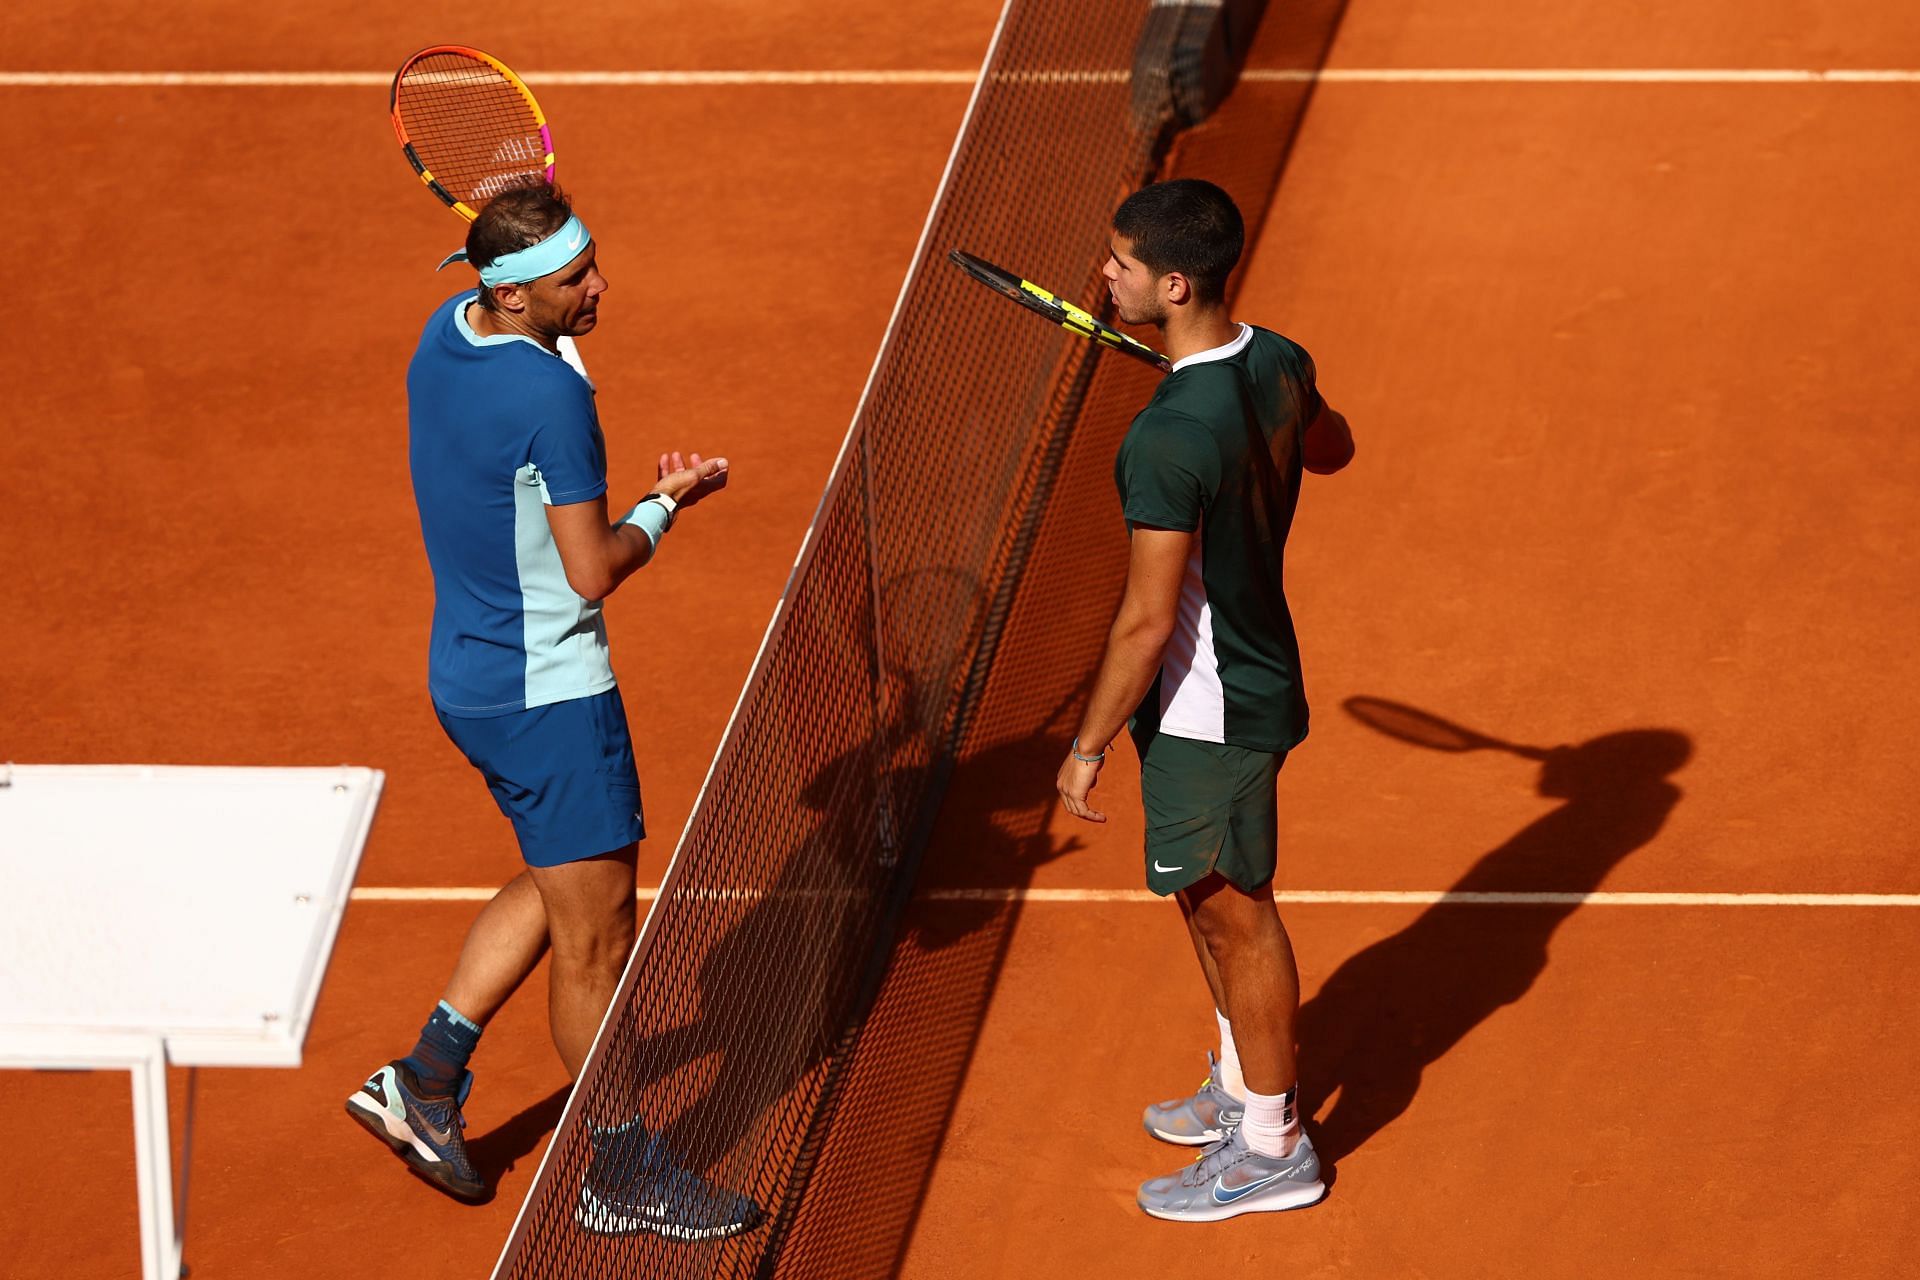 Alcaraz on court with his Nadal who he beat at Madrid